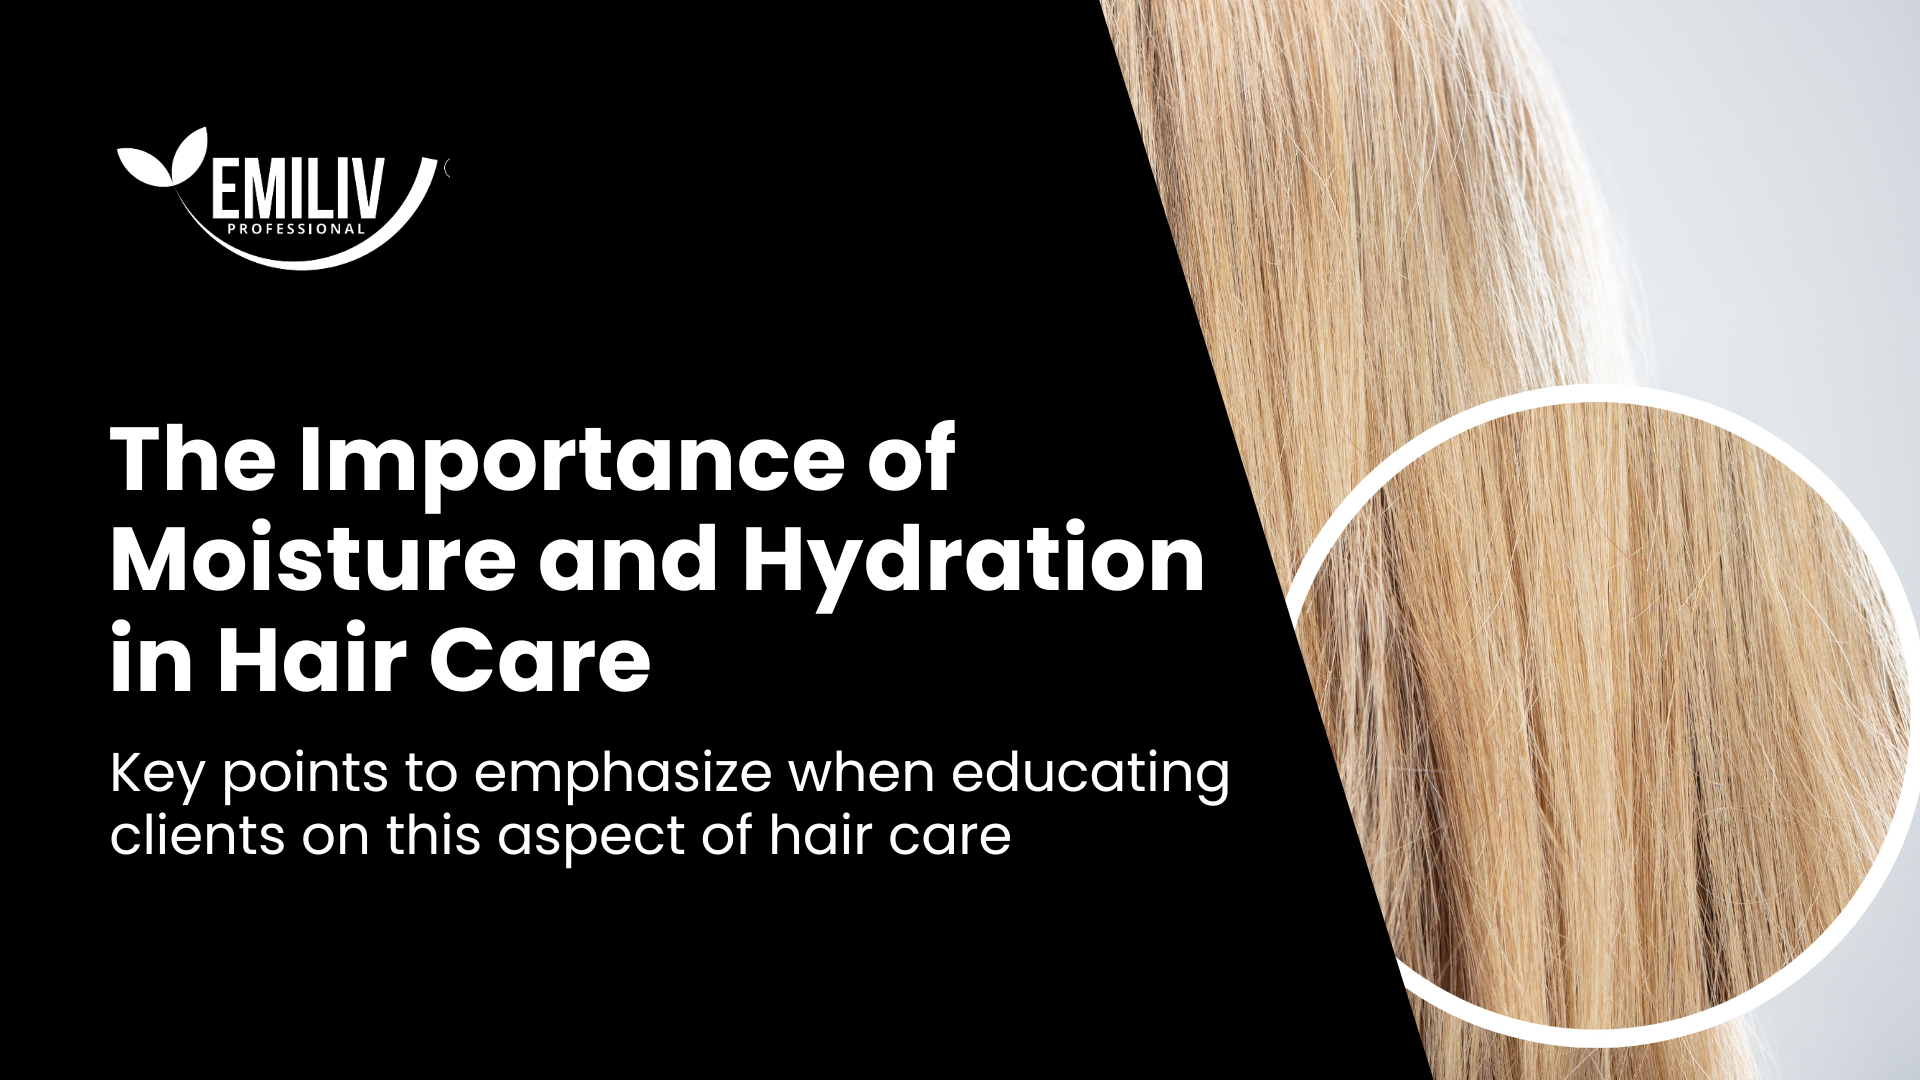 The Importance of Moisture and Hydration in Hair Care